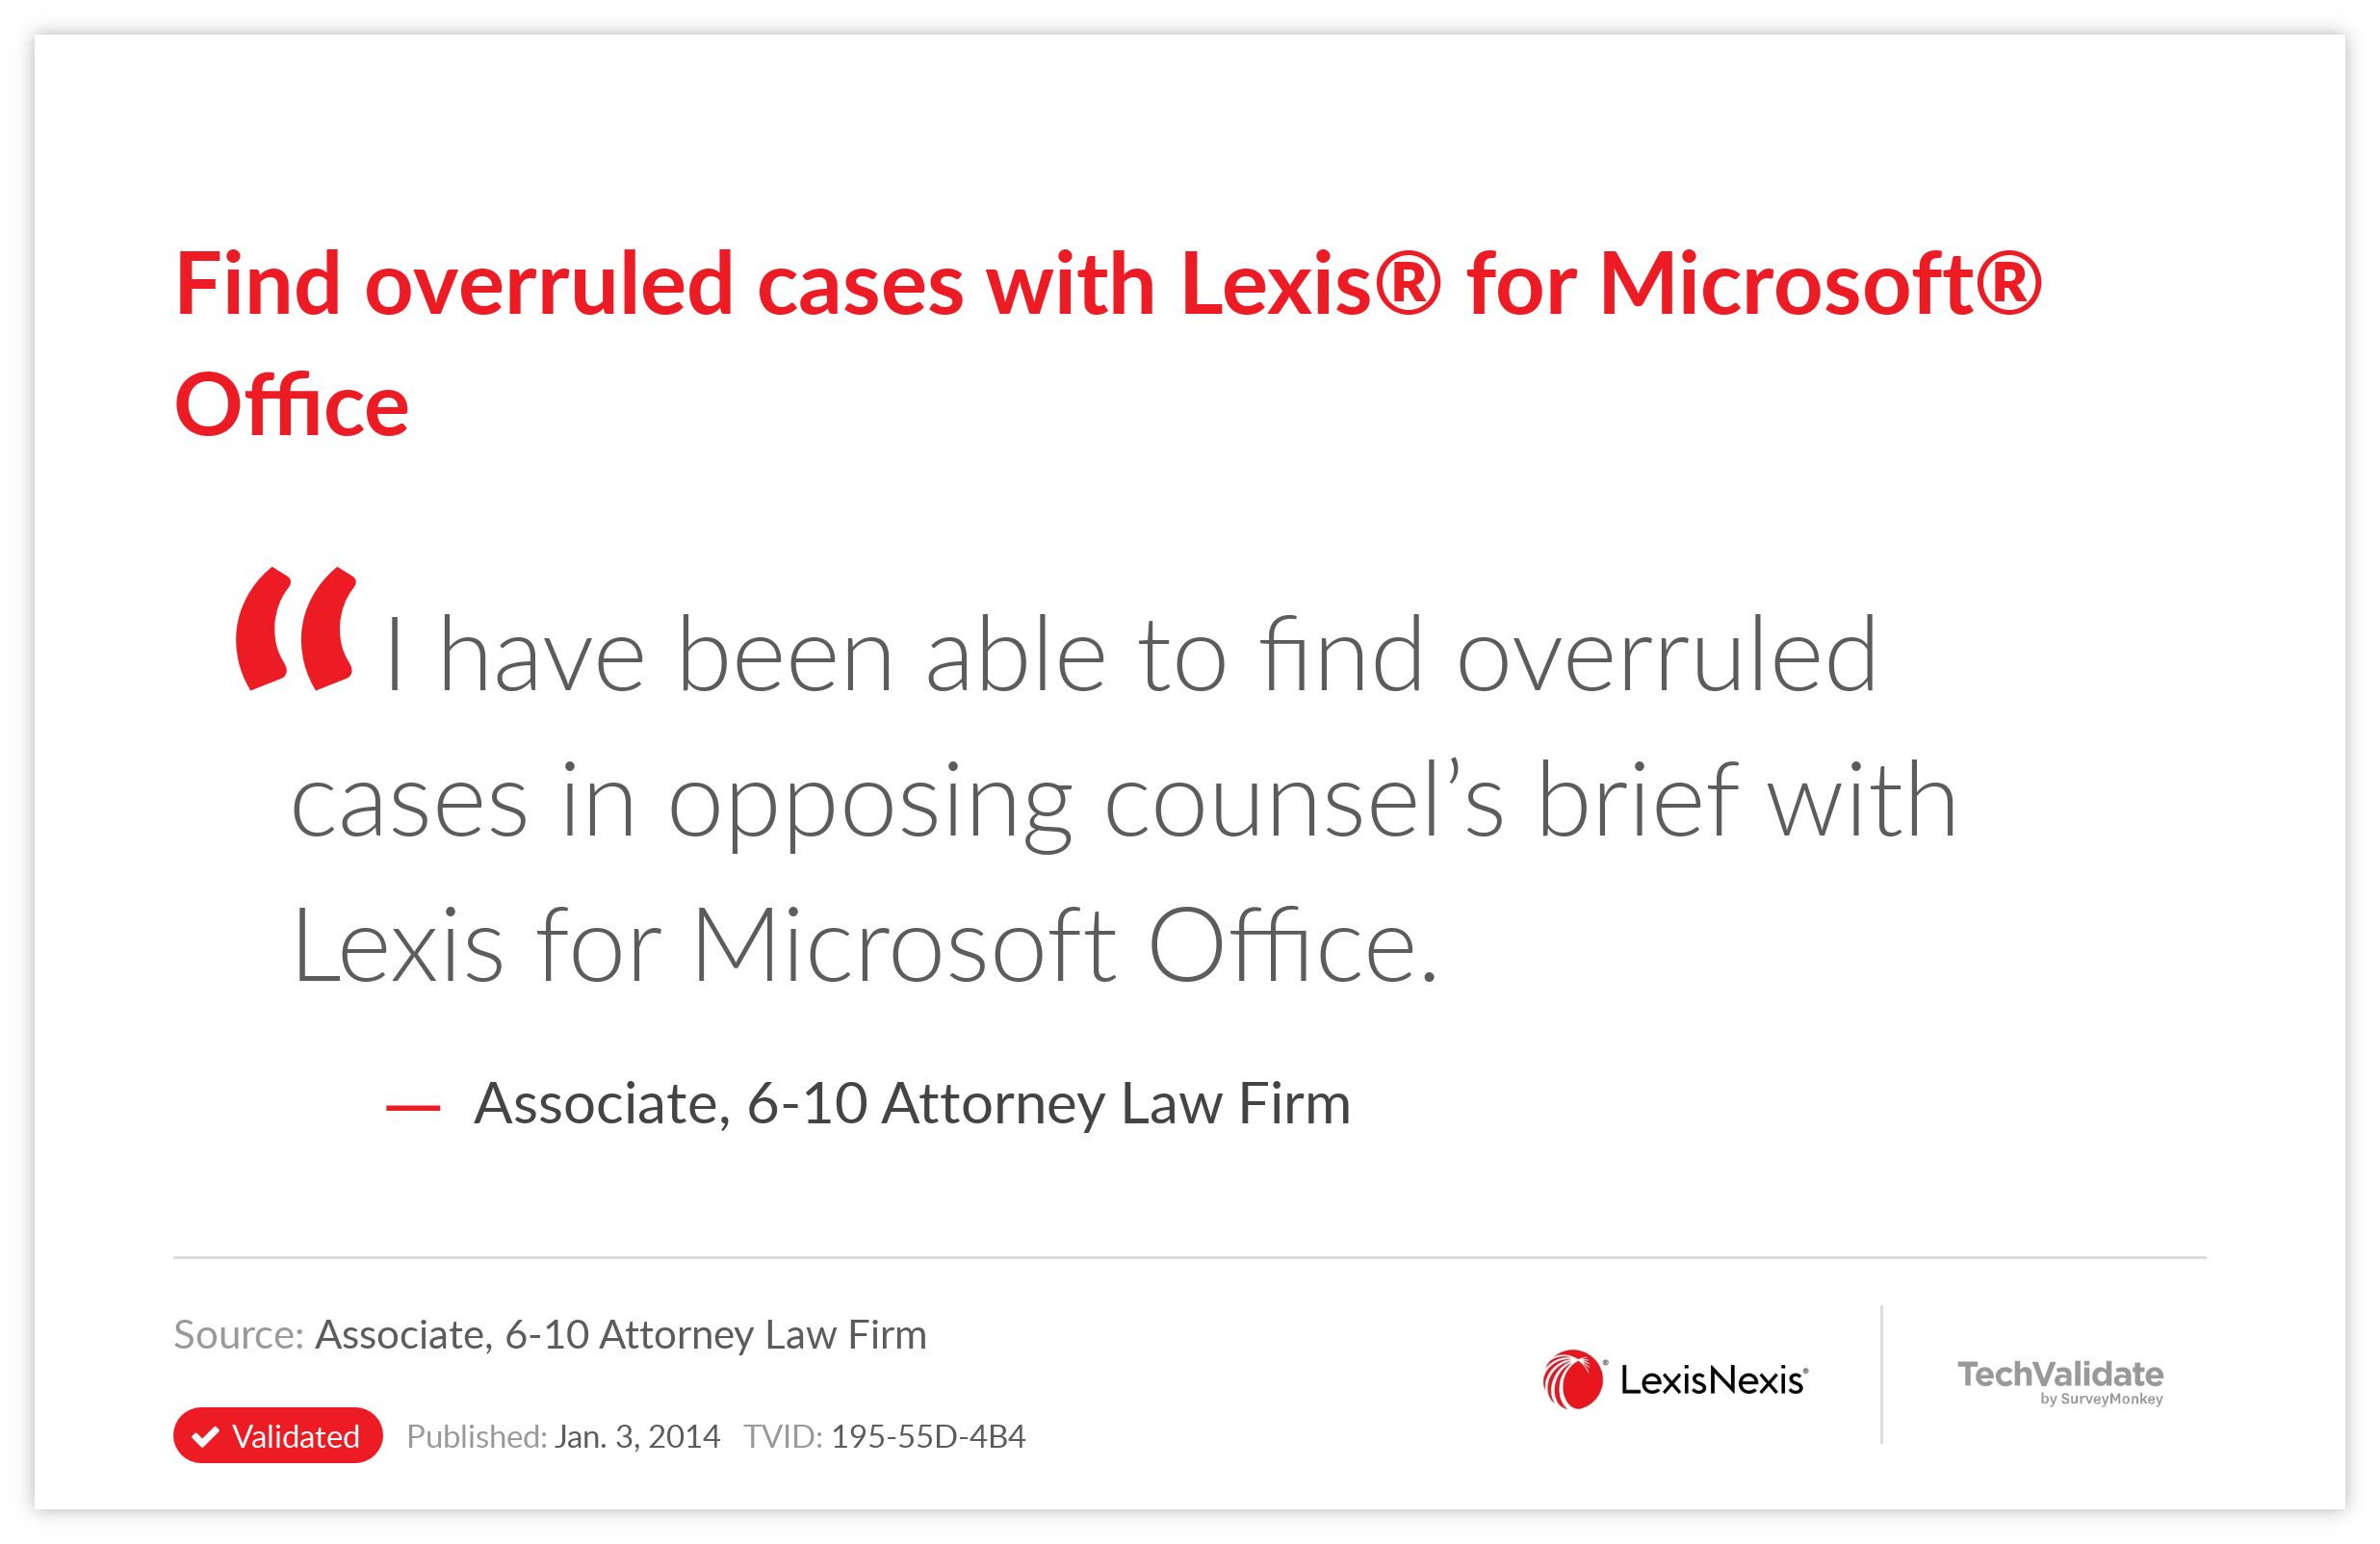 Find overruled cases with Lexis® for Microsoft® Office